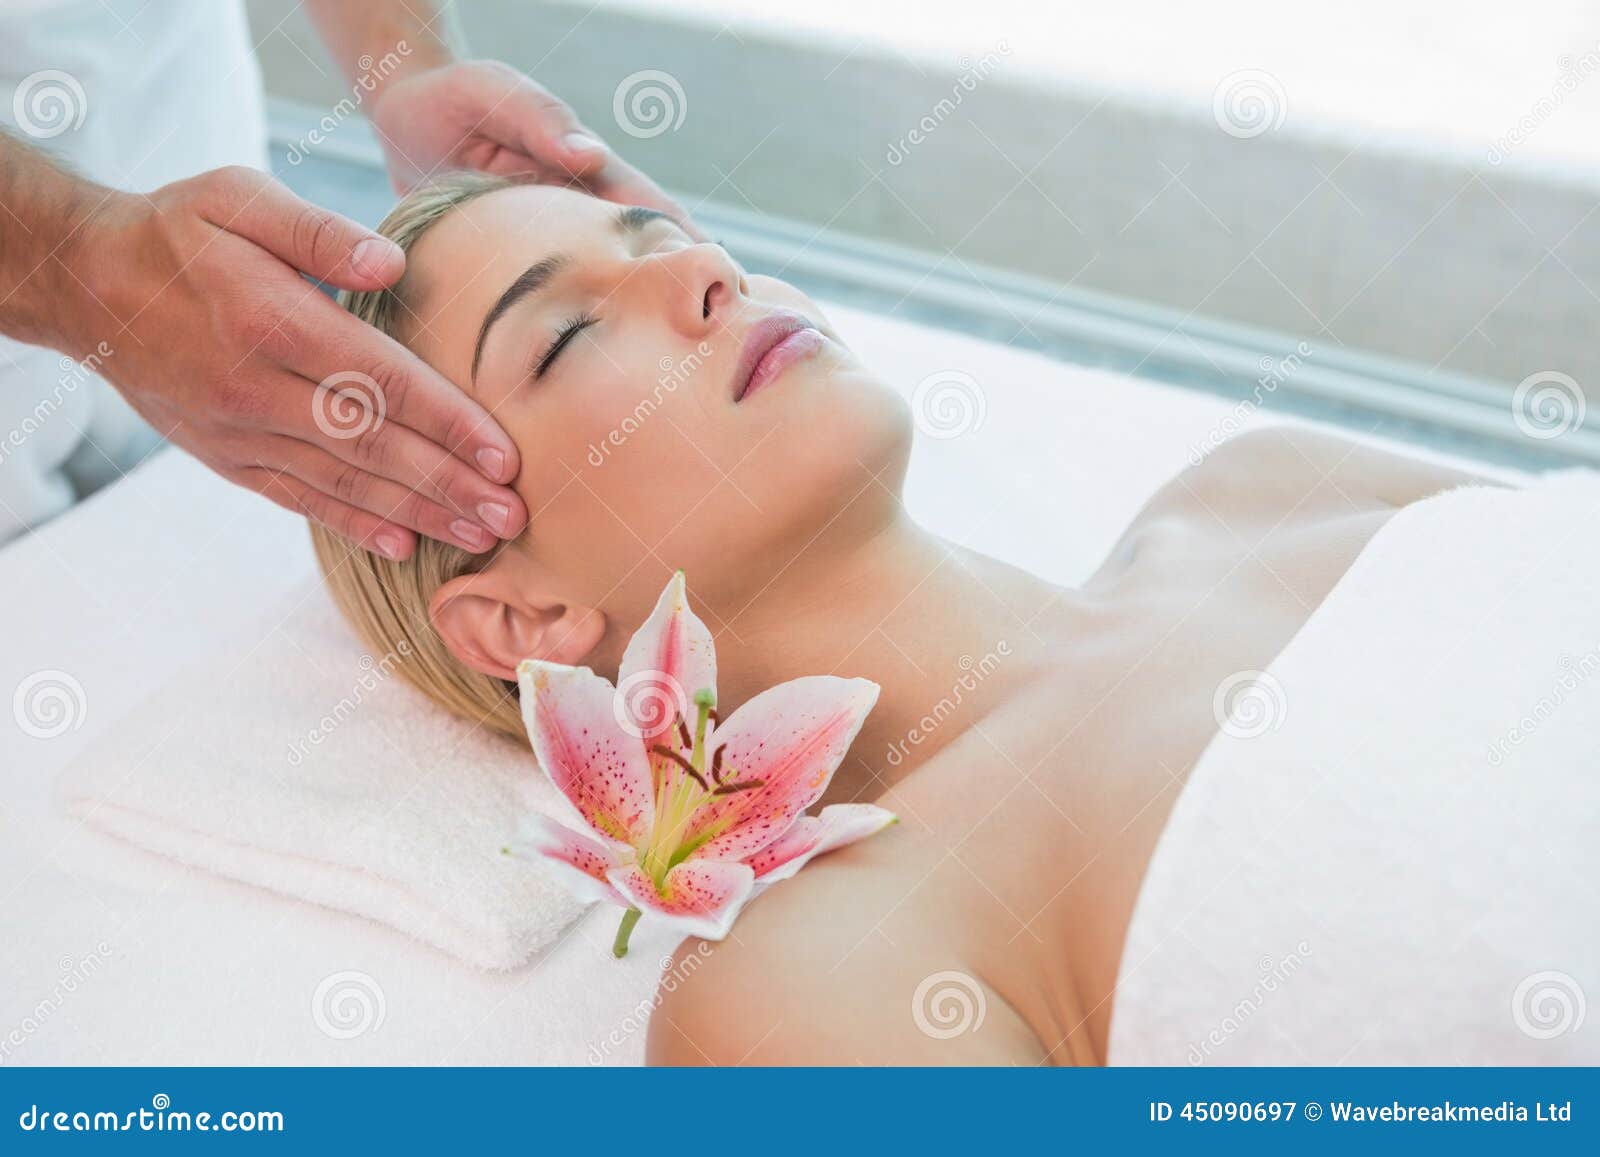 Attractive Woman Receiving Head Massage At Spa Center Stock Image